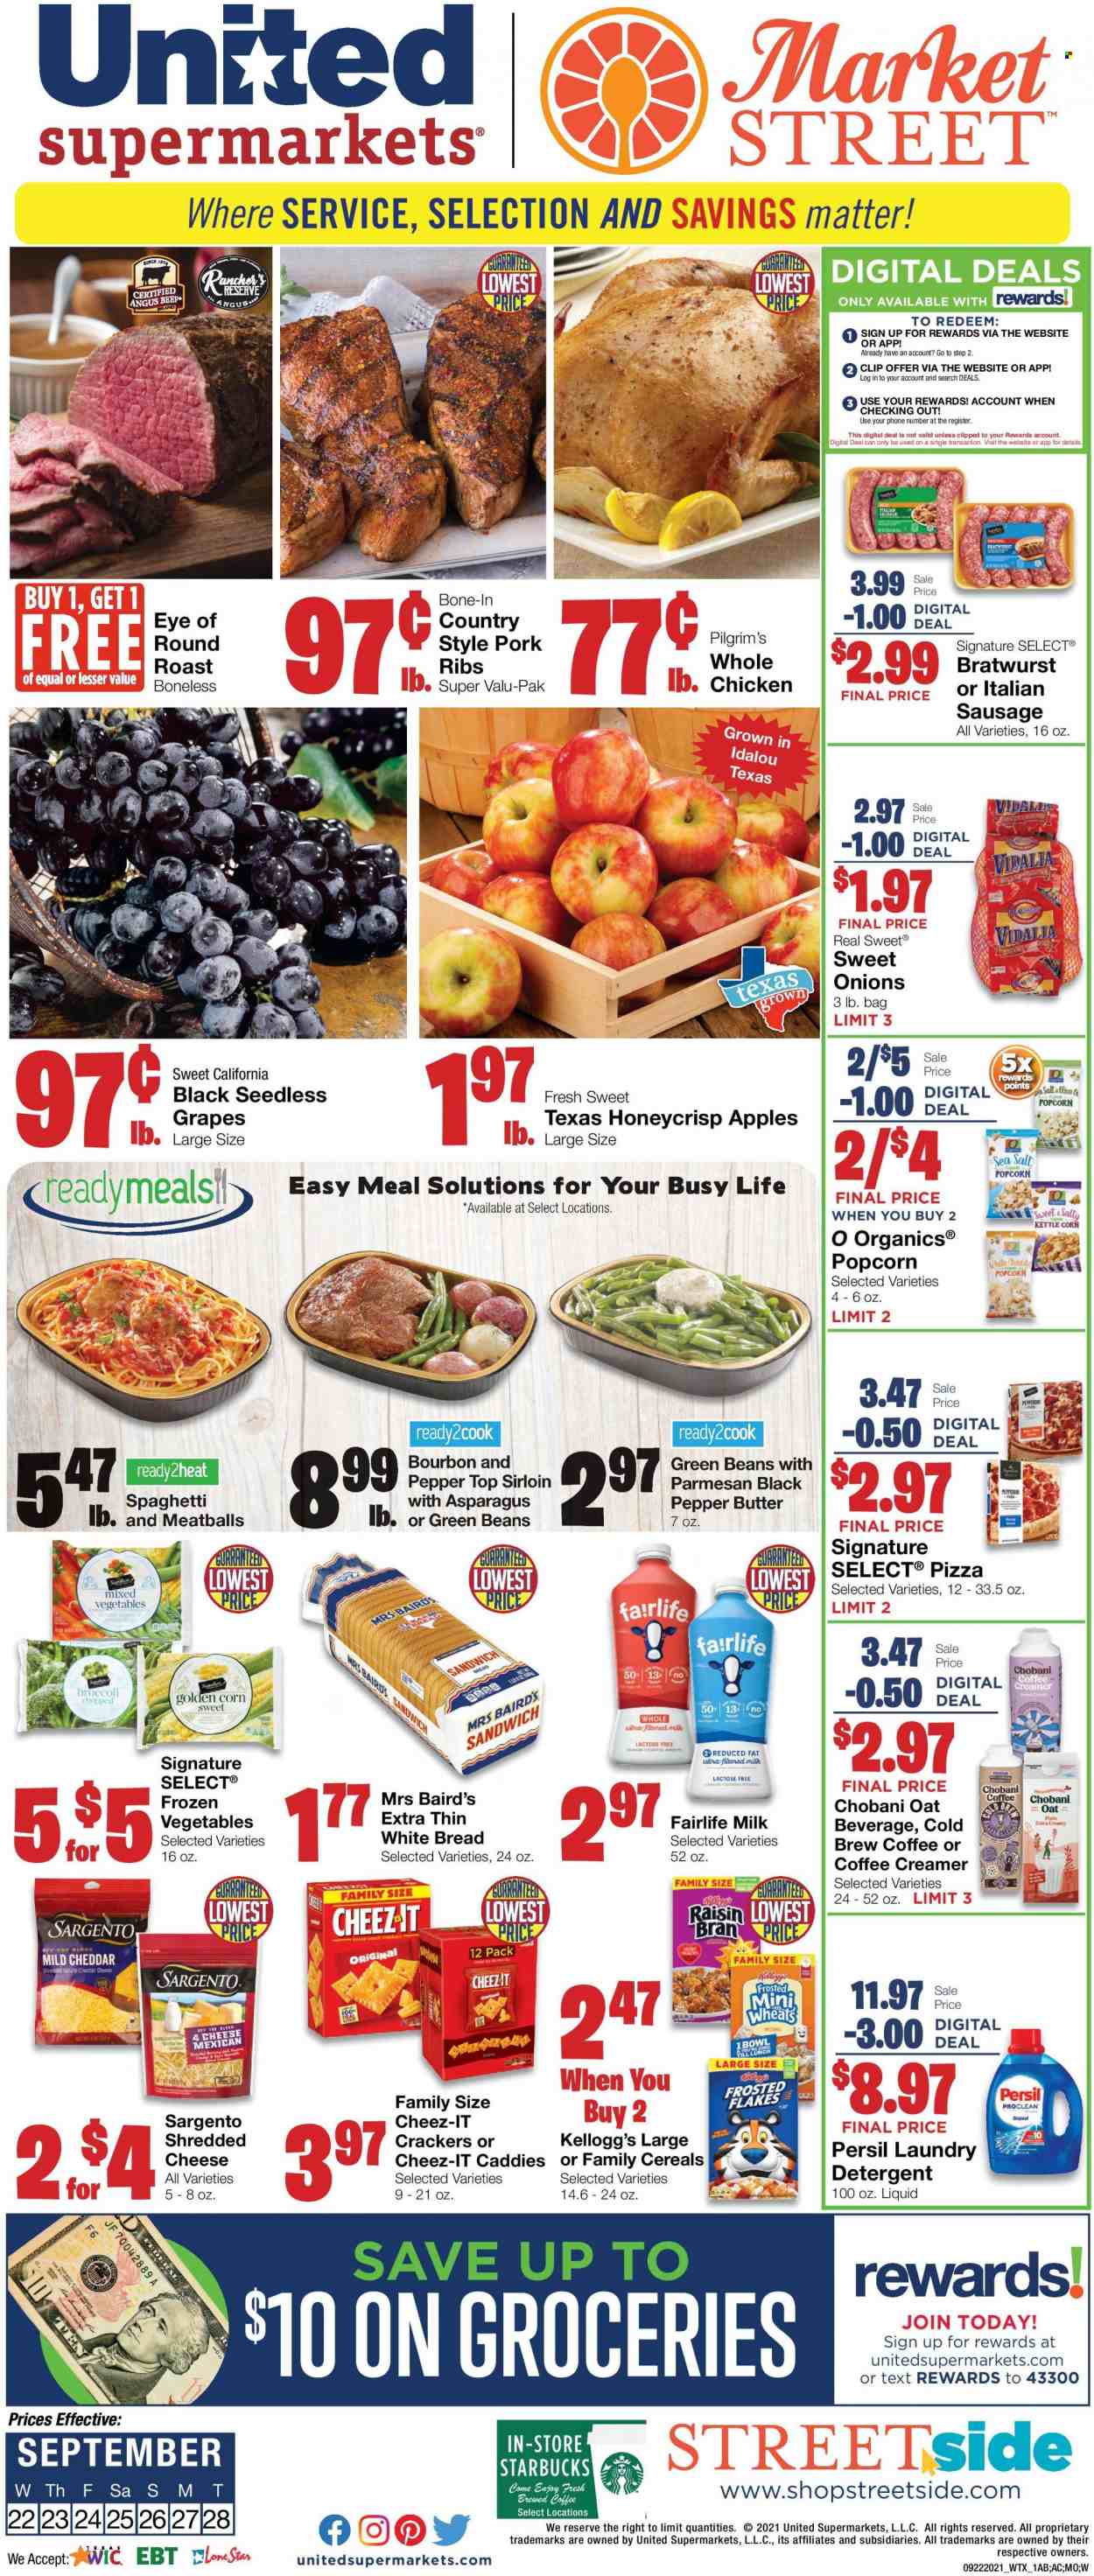 thumbnail - United Supermarkets Flyer - 09/22/2021 - 09/28/2021 - Sales products - seedless grapes, bread, white bread, asparagus, corn, apples, grapes, beef meat, eye of round, round roast, pork meat, pork ribs, spaghetti, pizza, meatballs, sandwich, bratwurst, sausage, mild cheddar, parmesan, Sargento, Chobani, milk, butter, creamer, mixed vegetables, crackers, Kellogg's, popcorn, Cheez-It, oats, cereals, Frosted Flakes, pepper, Starbucks, bourbon, detergent, Persil, laundry detergent. Page 1.